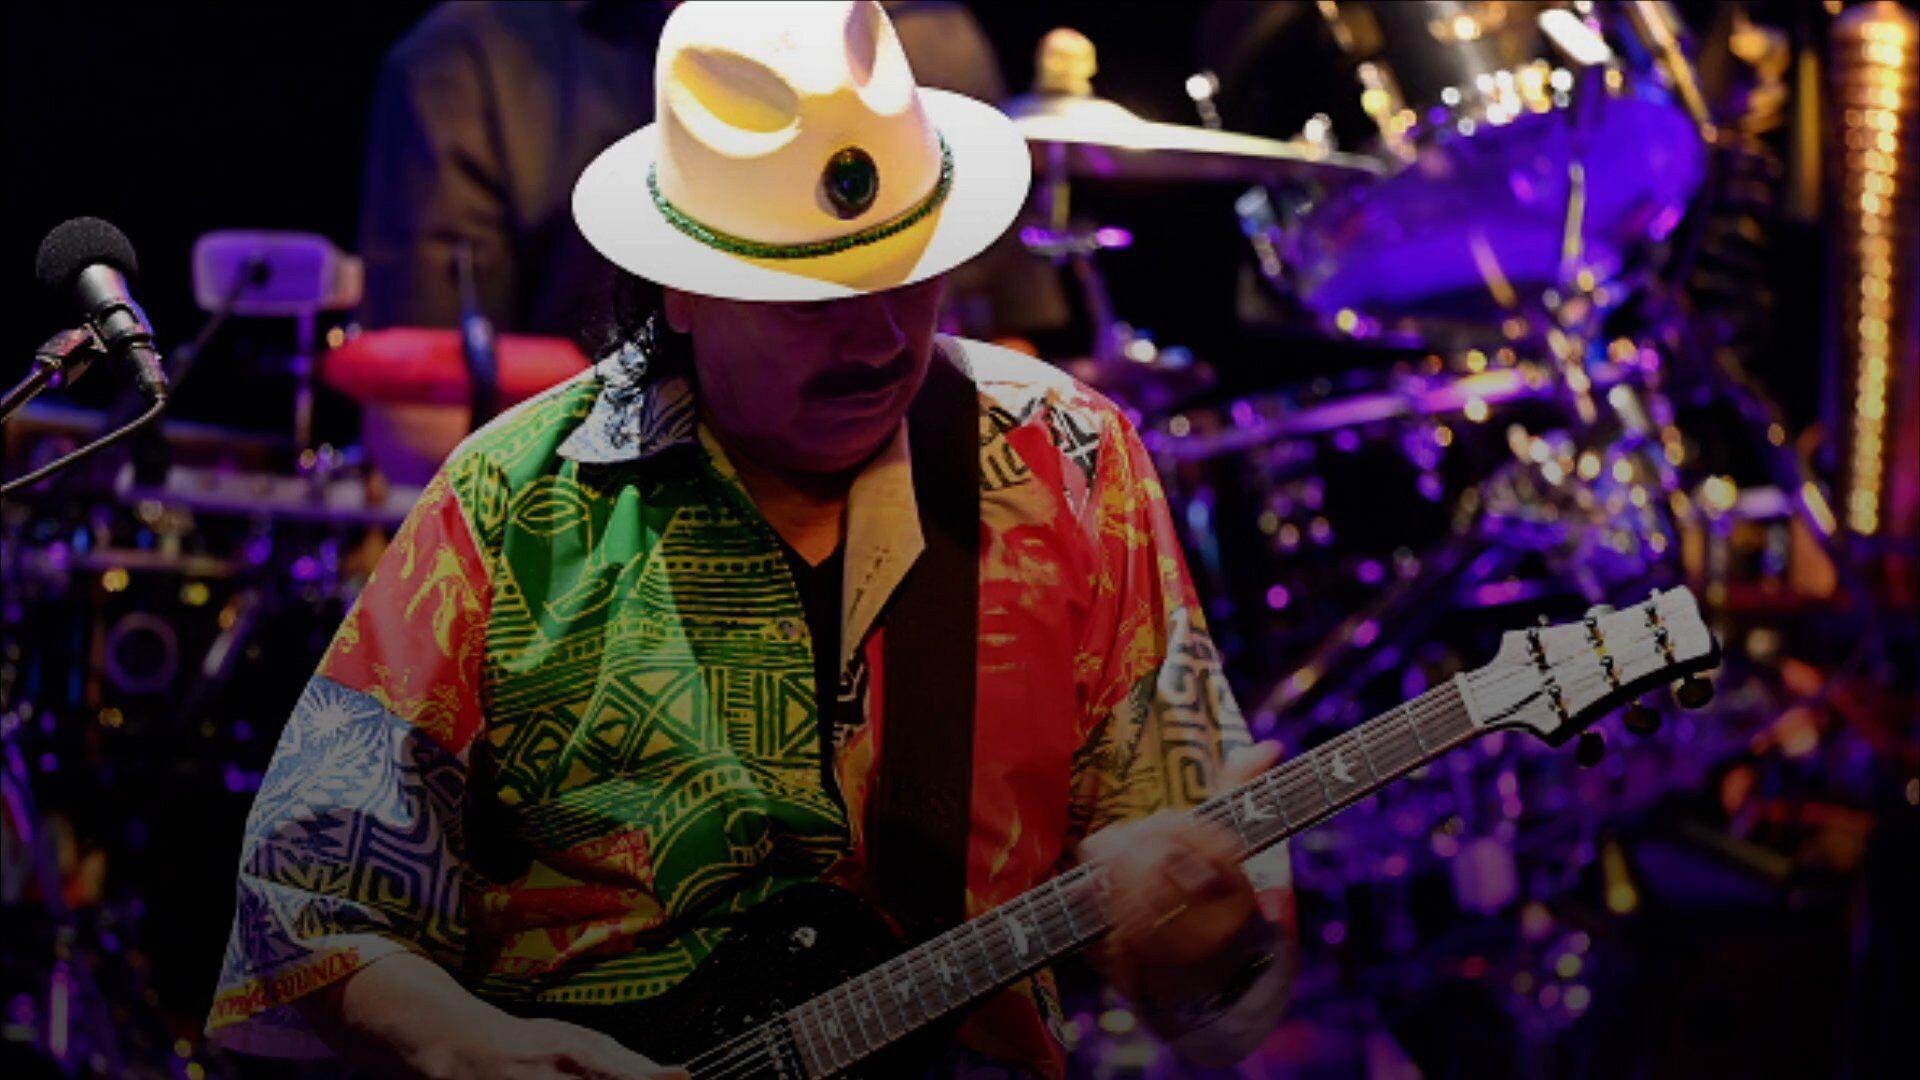 Carlos Santana Collapses on Stage During Concert